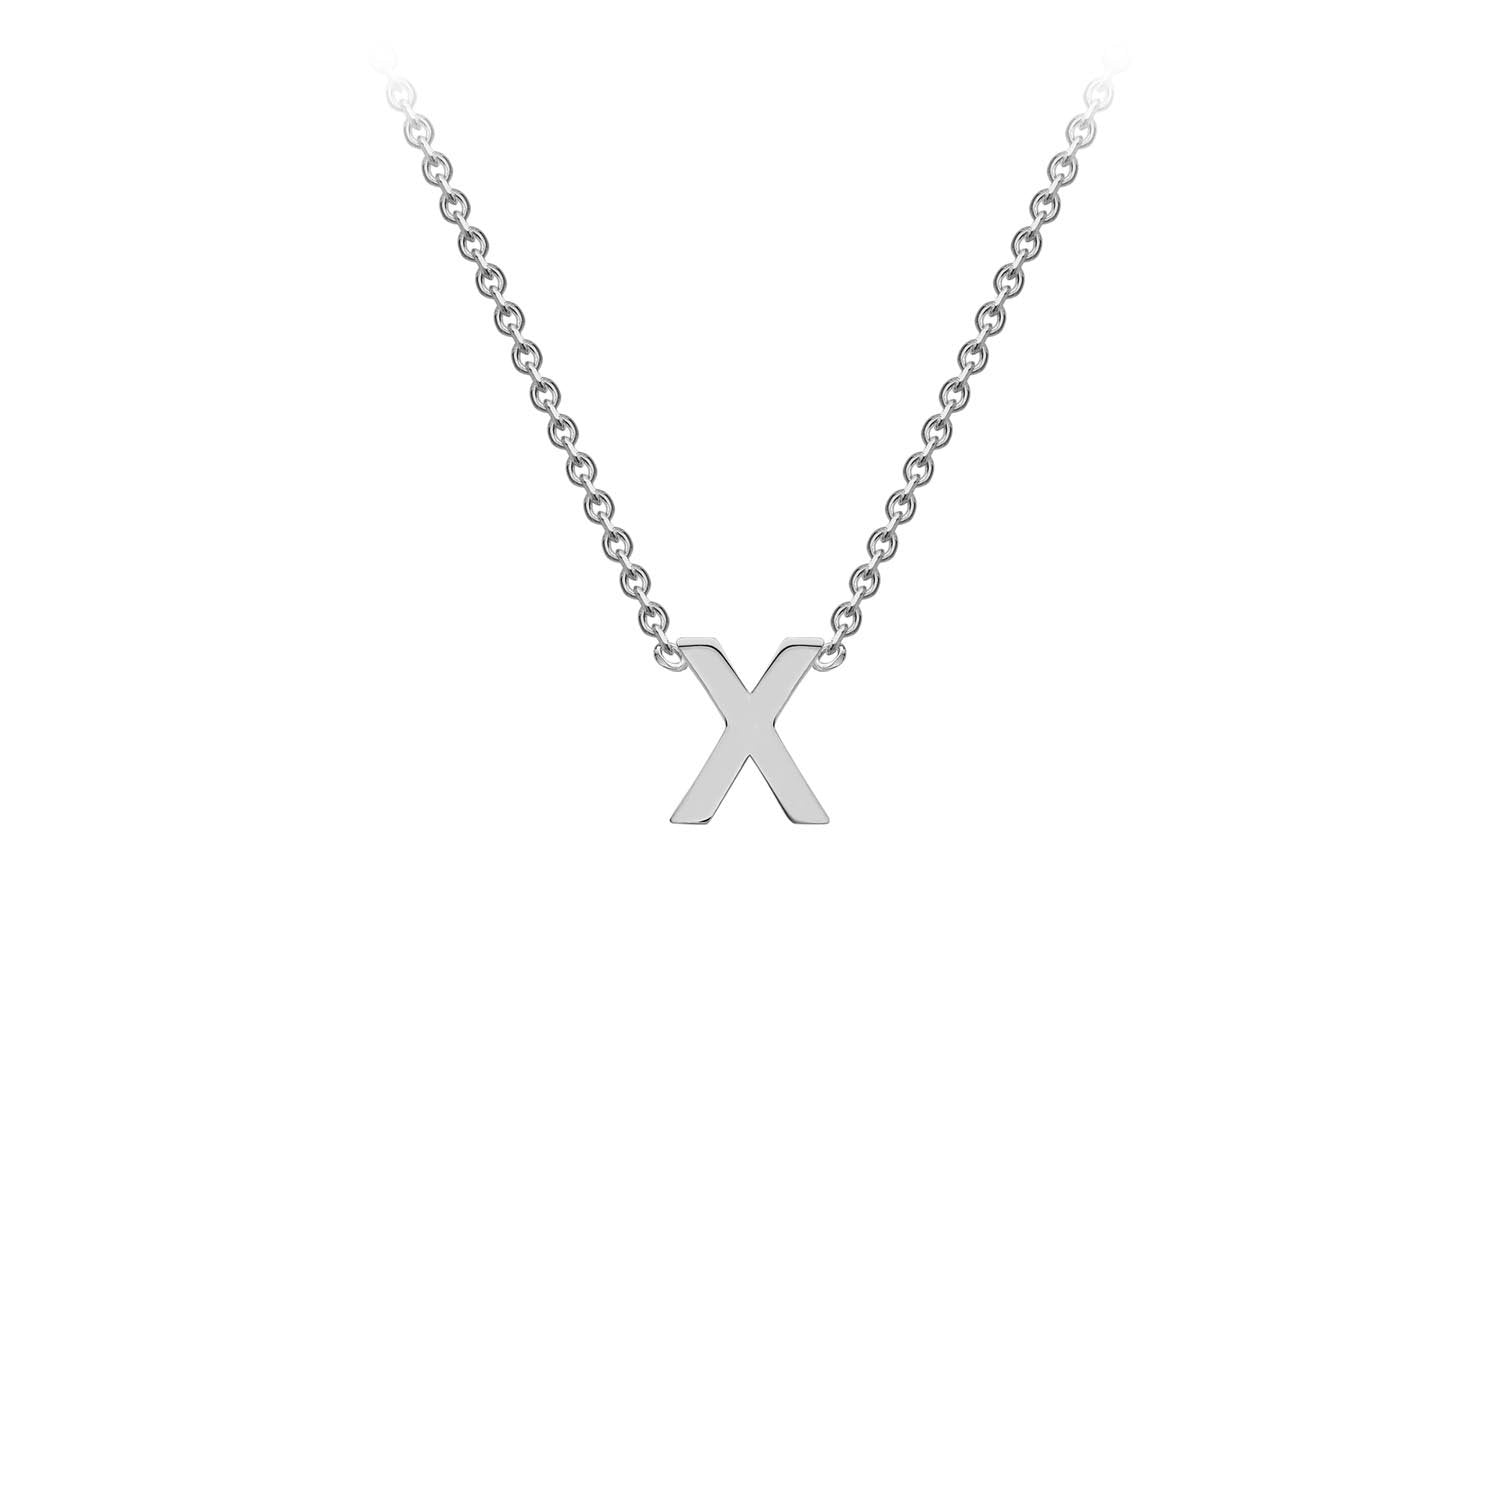 9ct White Gold 'X' Initial Adjustable Letter Necklace 38/43cm